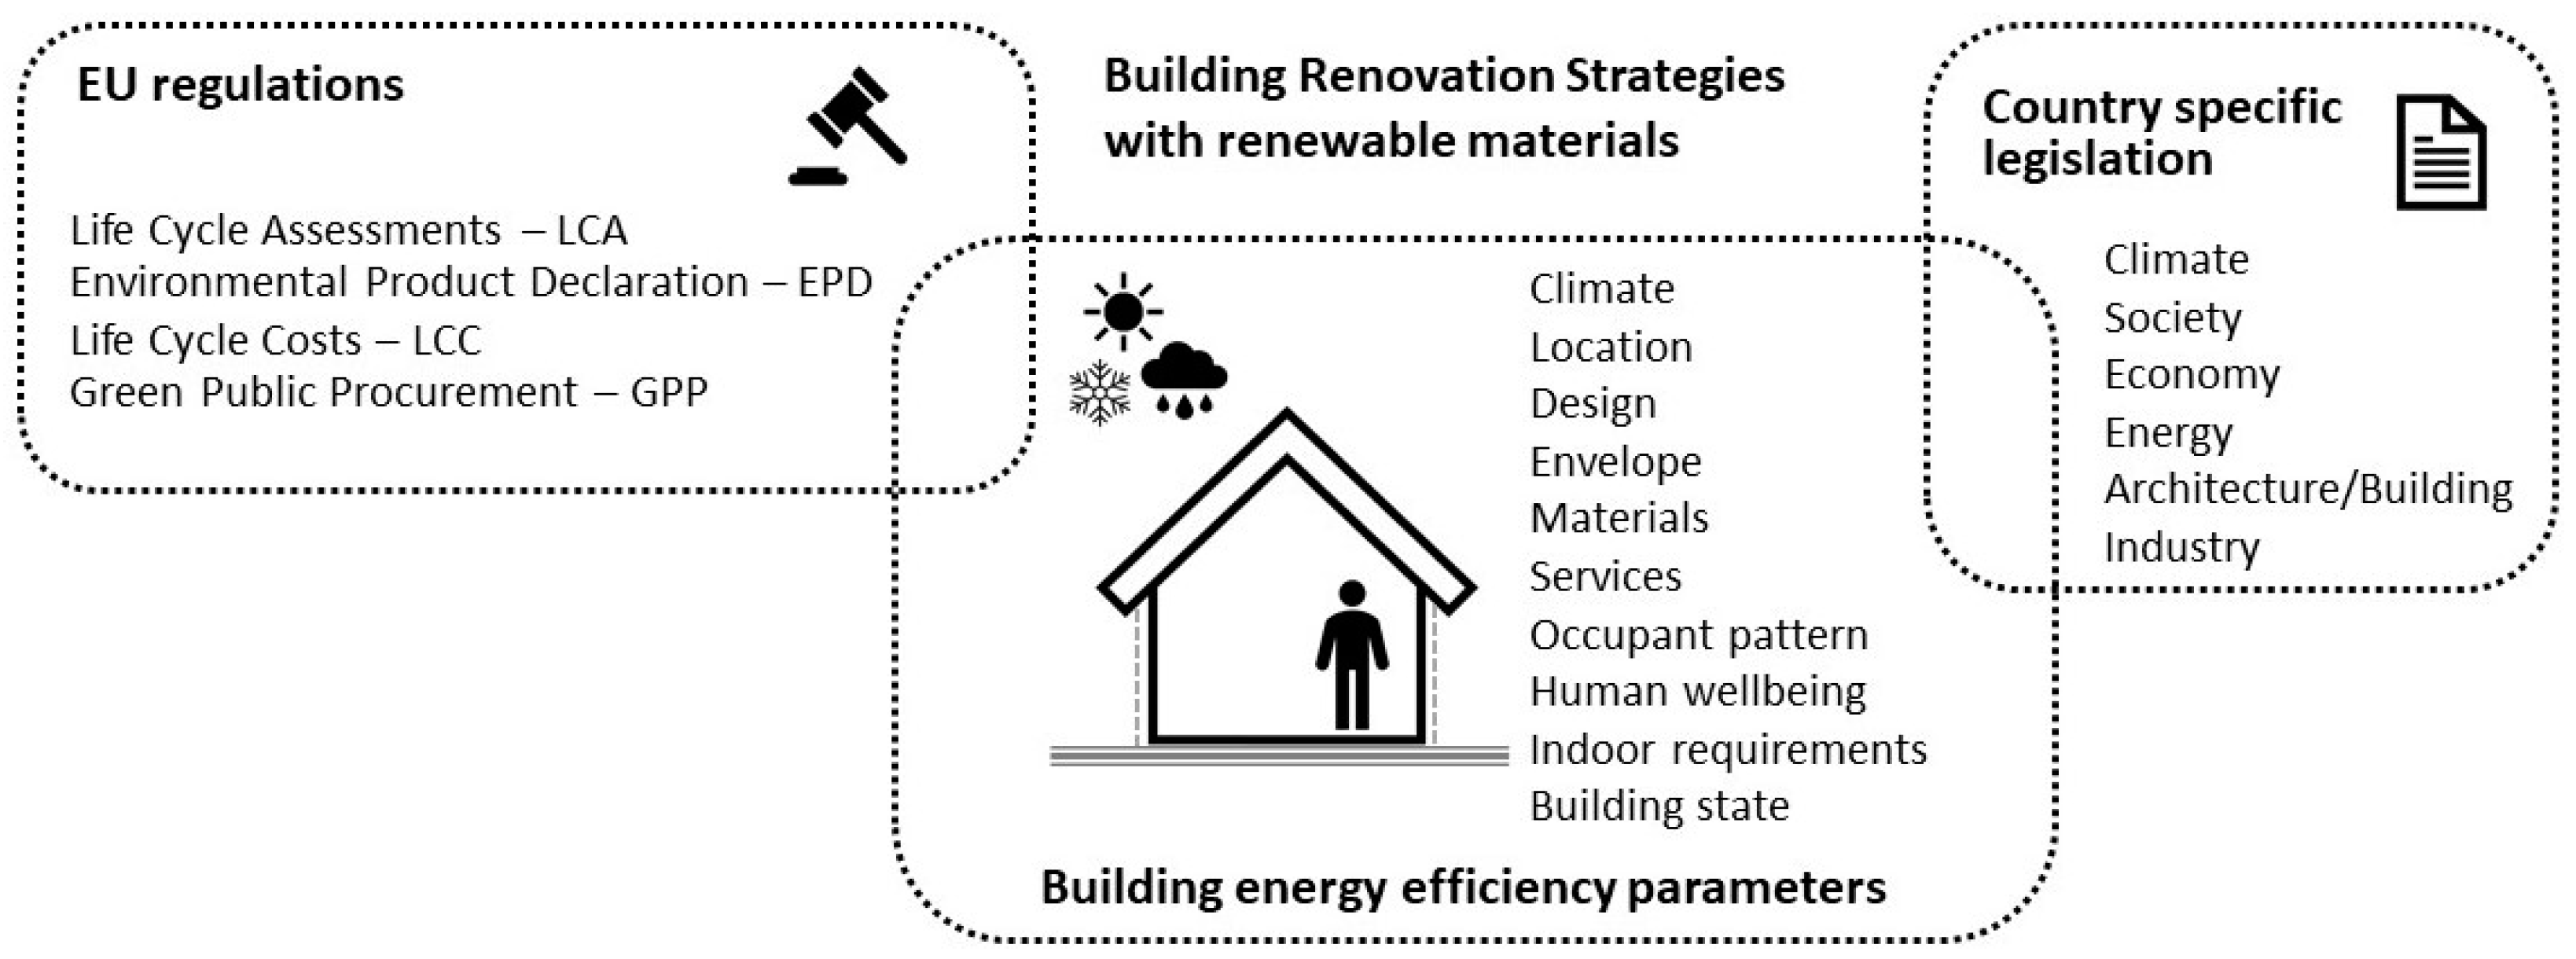 Sustainability | Free Full-Text Current and Frameworks the Retrofitting Slovenia Opportunities Renewable of Materials—Comparative Analysis Energy in | Bosnia-Herzegovina Using